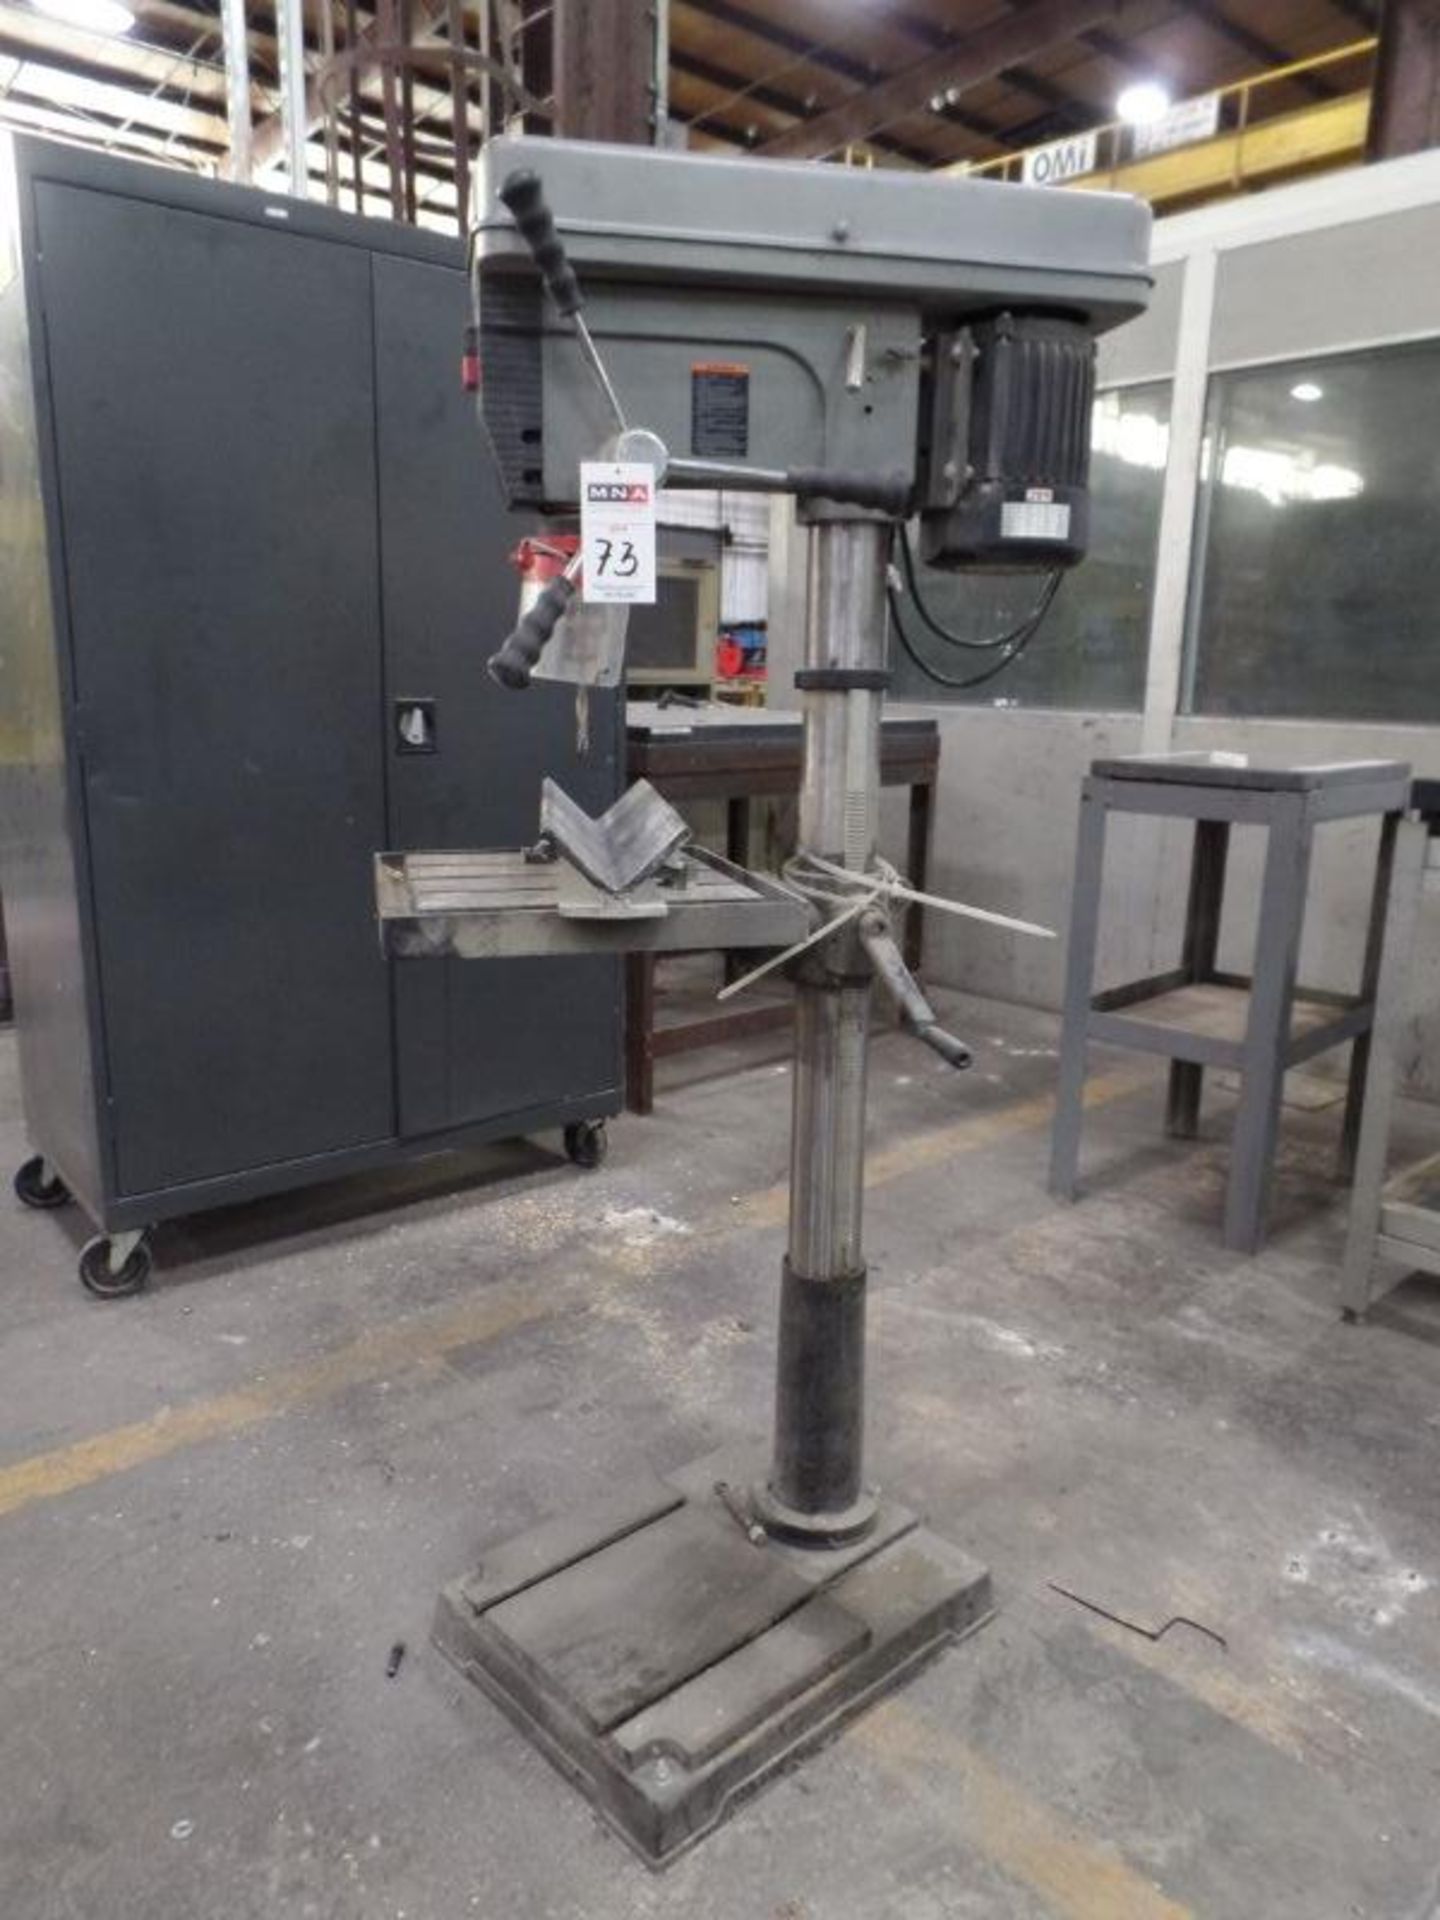 Jet J-2550 20" Floor Type Drill Press, 16" x 18" Table, s/n 18052114 - Image 2 of 6